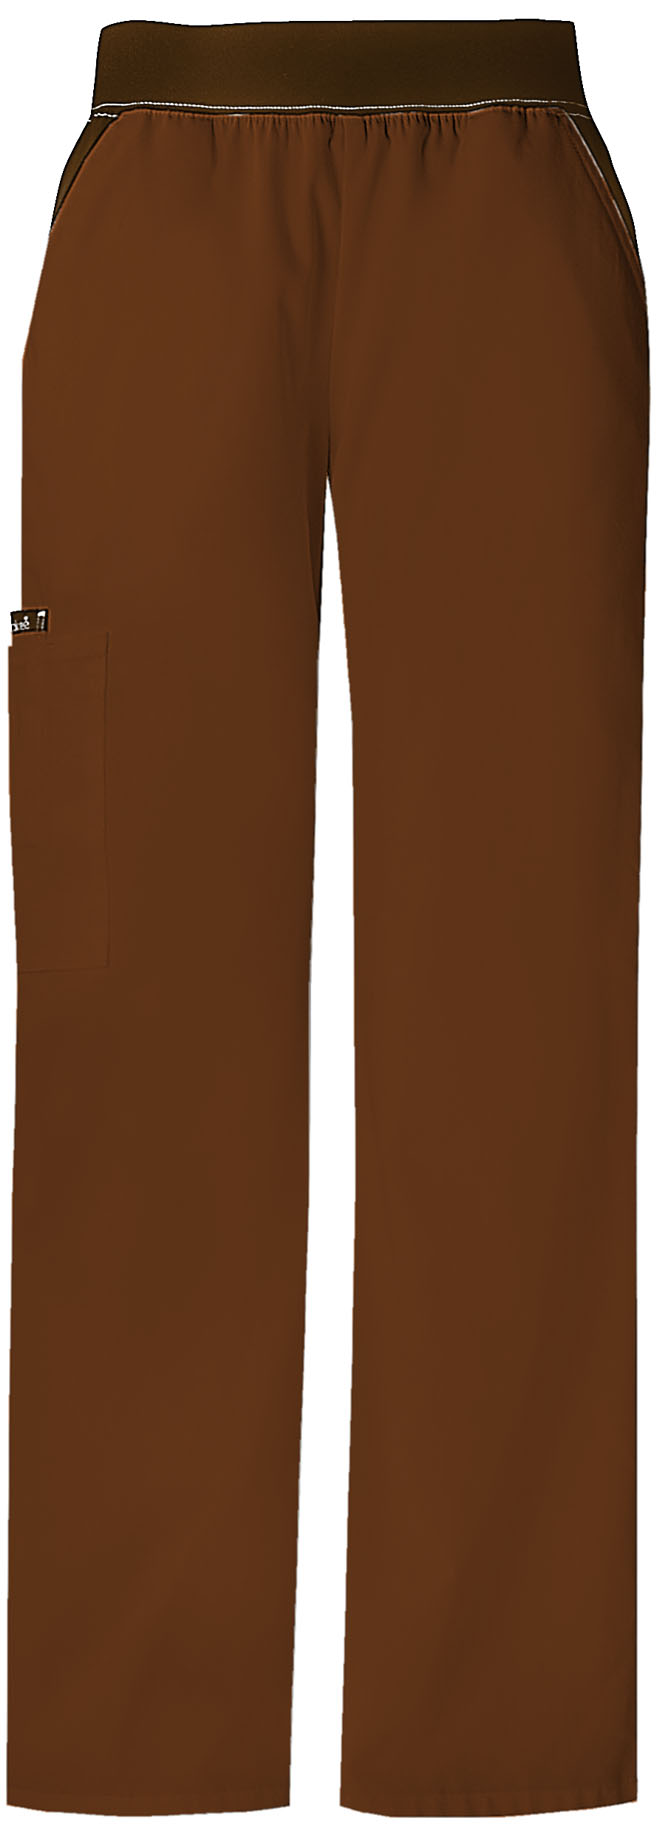 Cherokee Flexibles (Contrast Chocolate) Mid-Rise Knit Waist Pull-On Pant